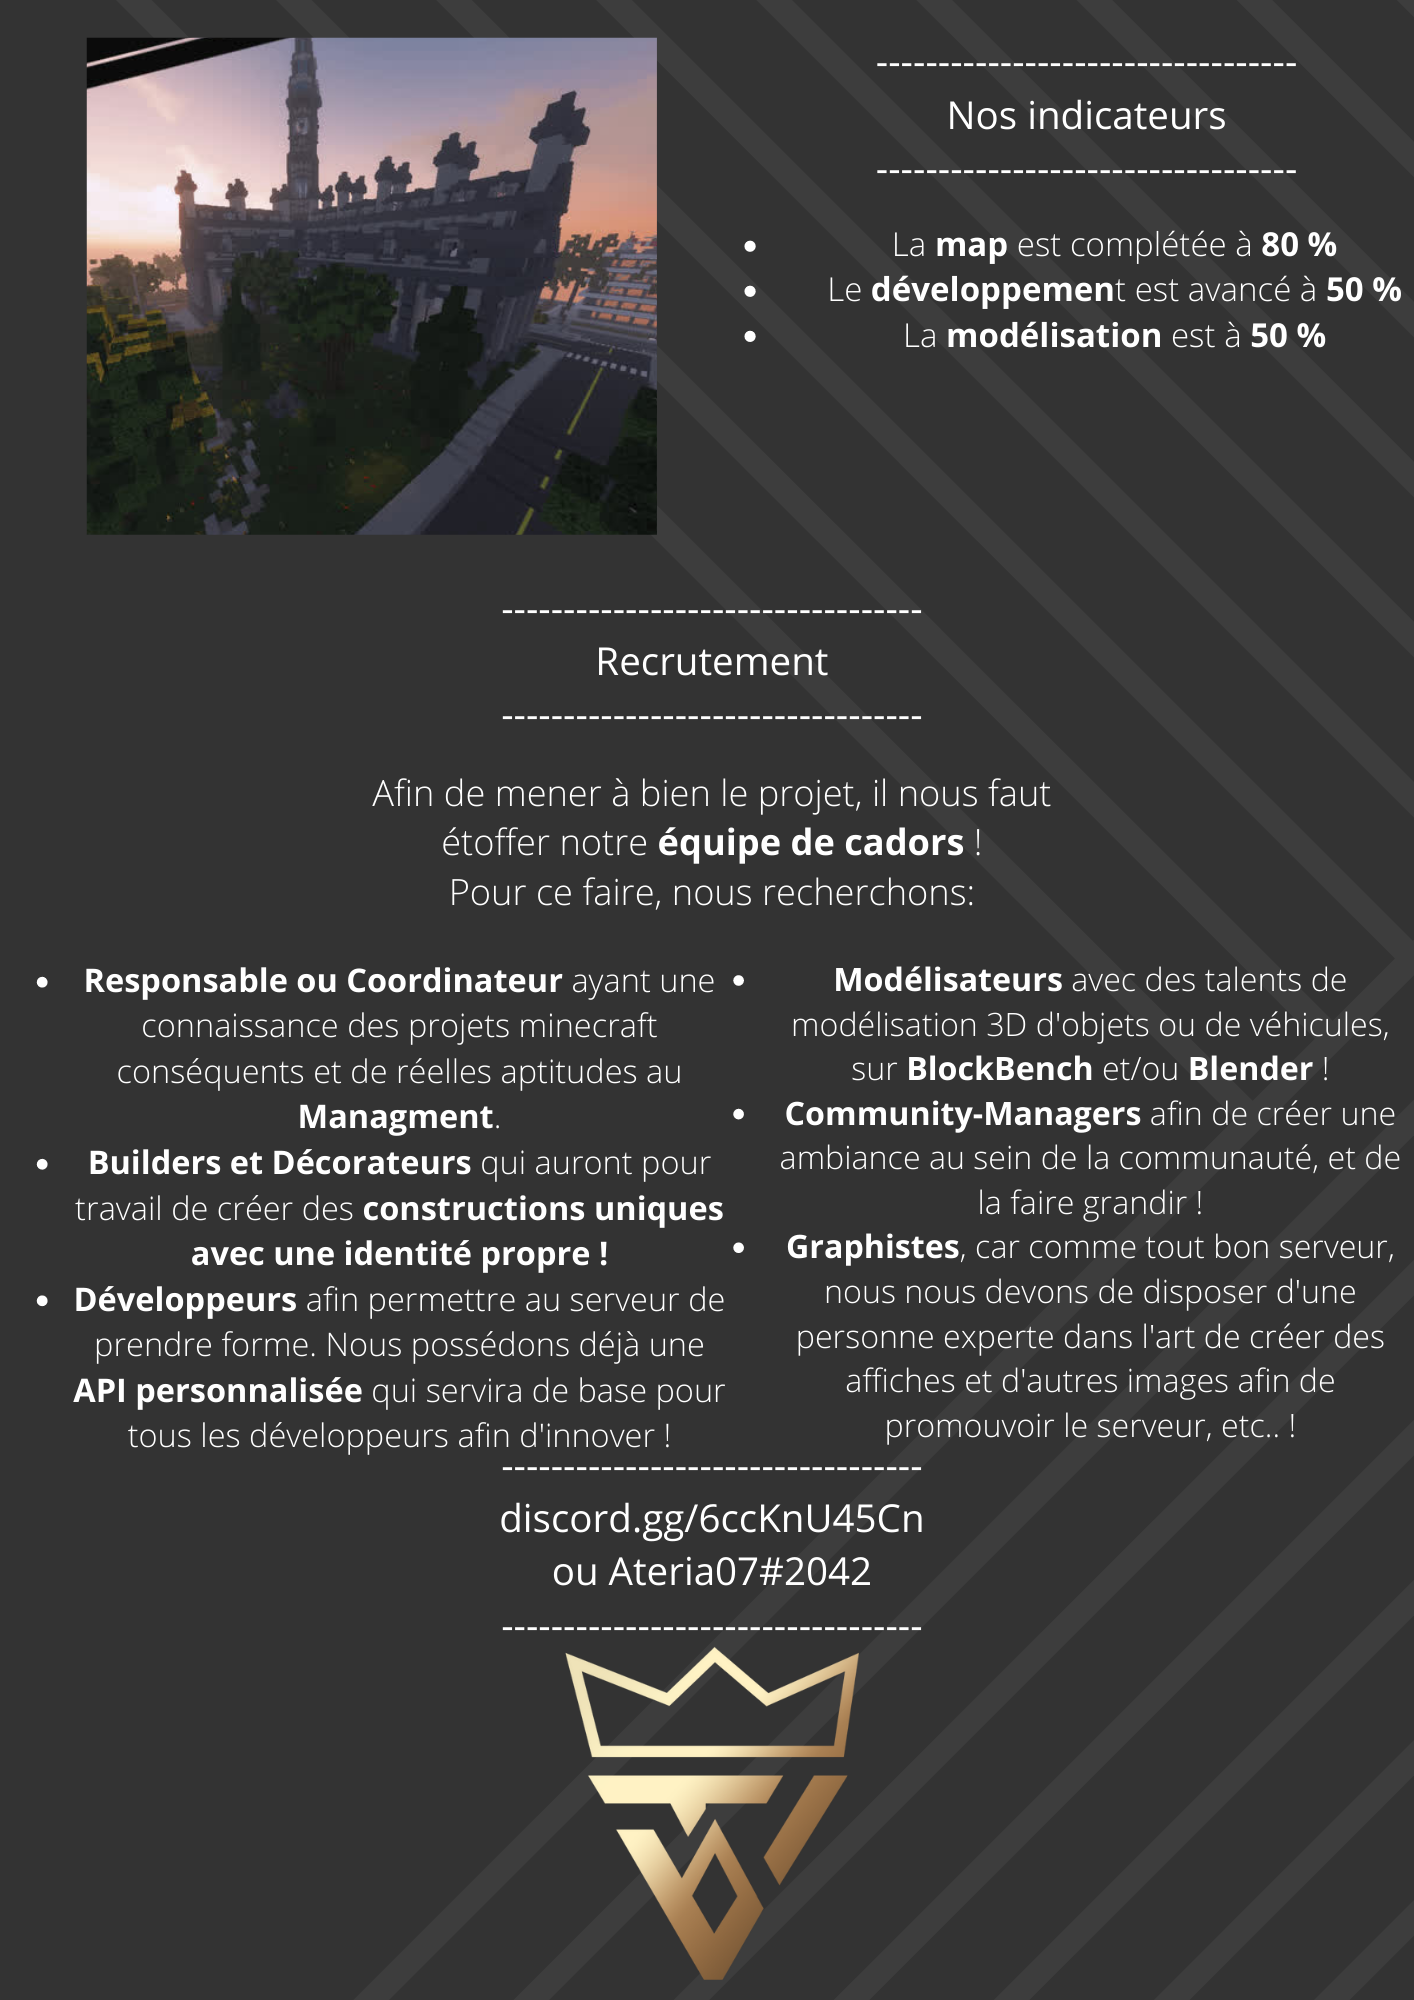 Annonce recrutement Venutras V4-page2.png